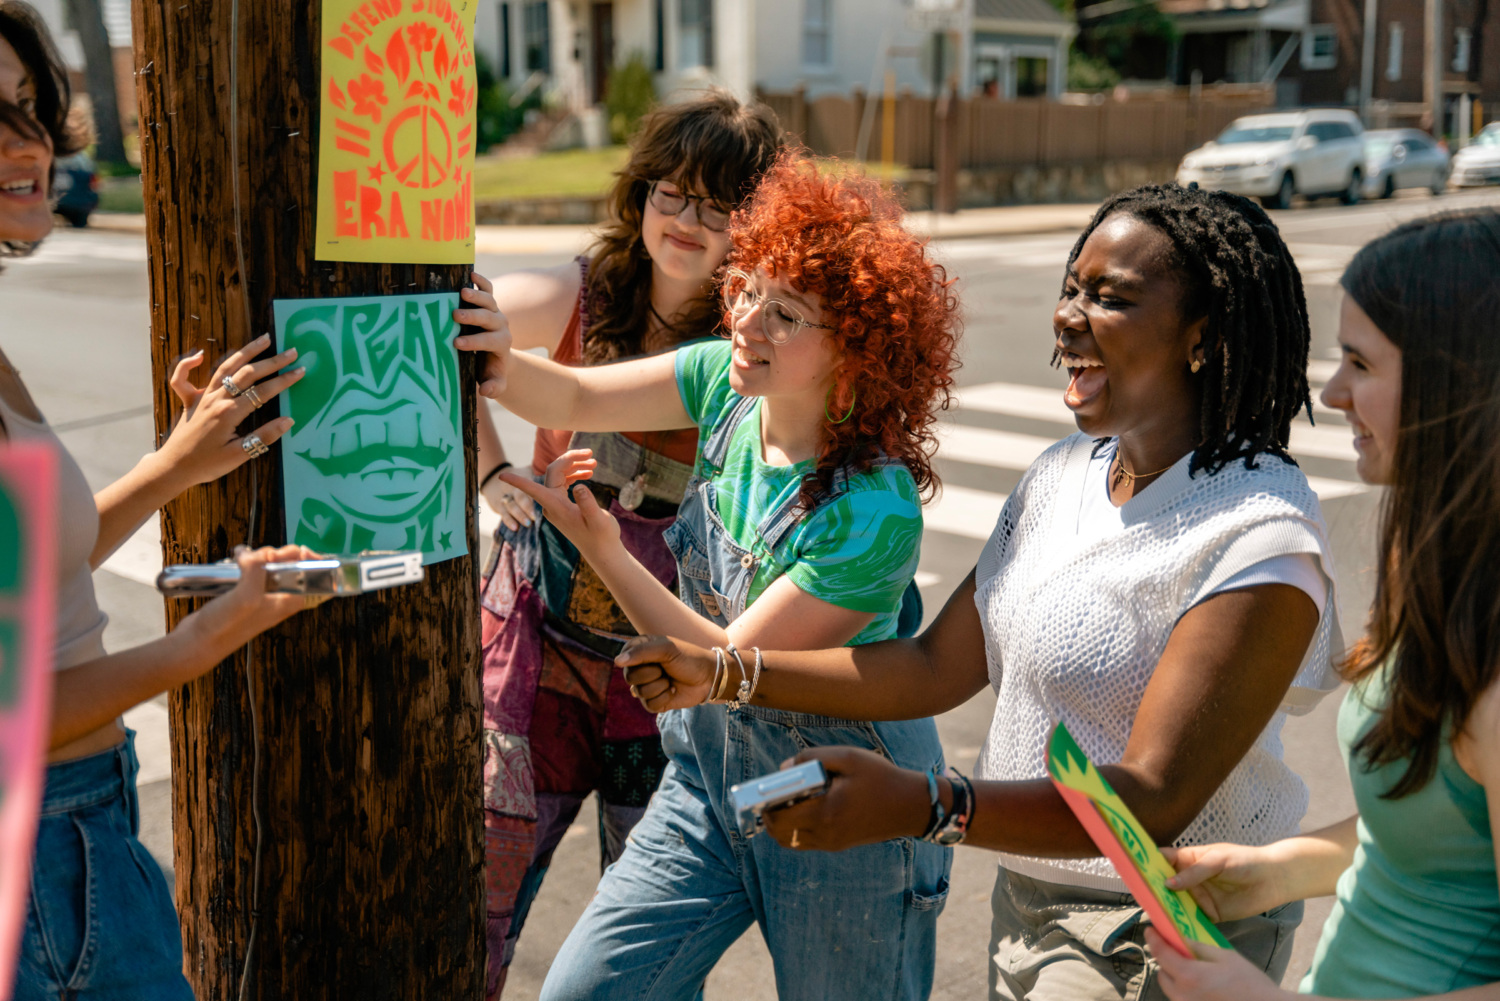 Anabelle Lombard and several other teen girls staple a sign to a utility pole.